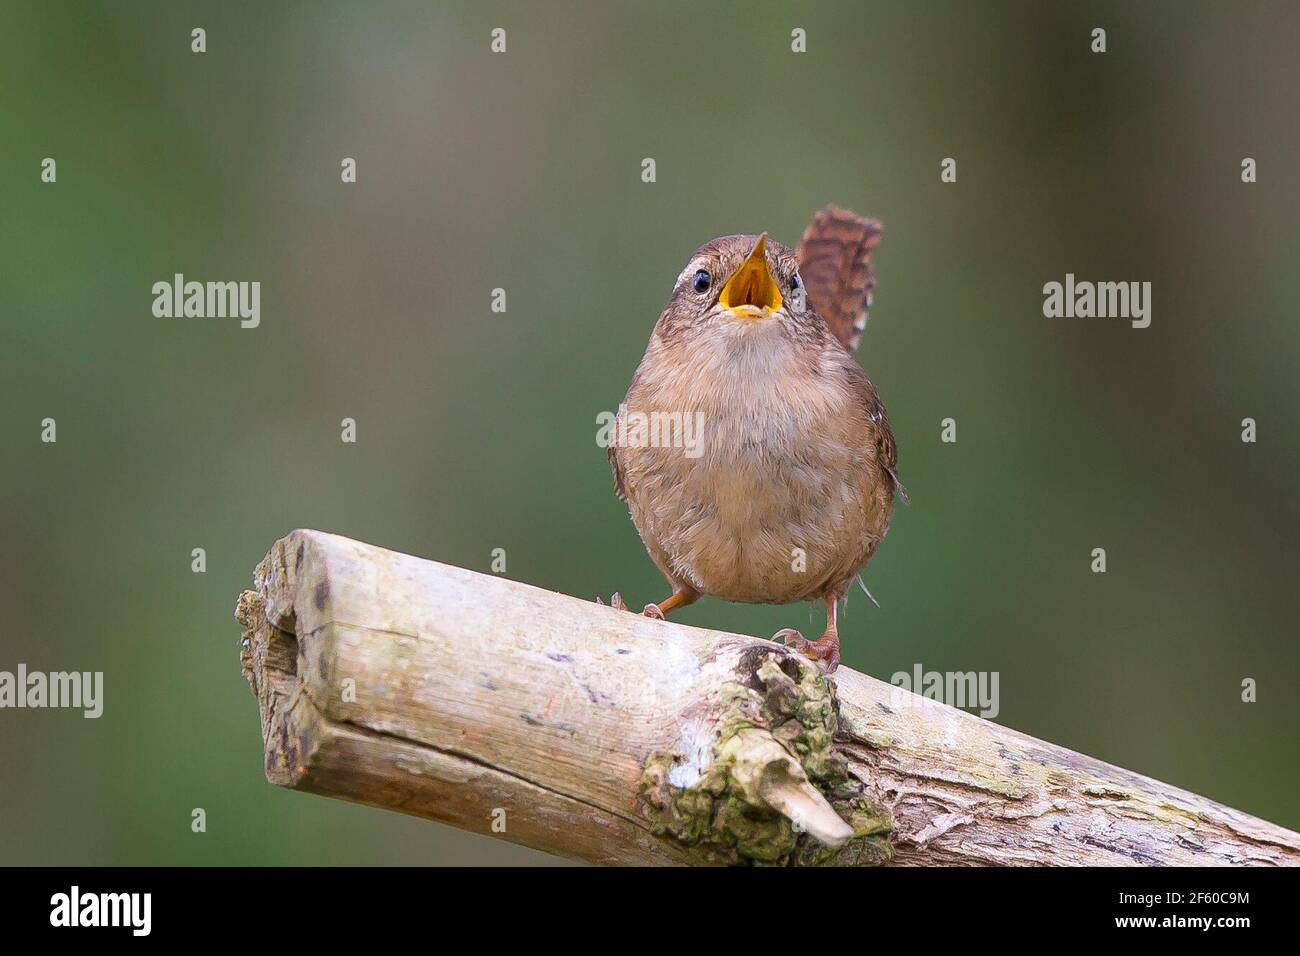 Kidderminster, UK. 29th March, 2021. UK weather: with very warm temperatures and beautiful sunshine the local wildlife doesn't hesitate in celebrating a fine, spring day. This Jenny wren bird bursts into beautiful song whilst perching isolated on a branch. Credit: Lee Hudson/Alamy Live News Stock Photo